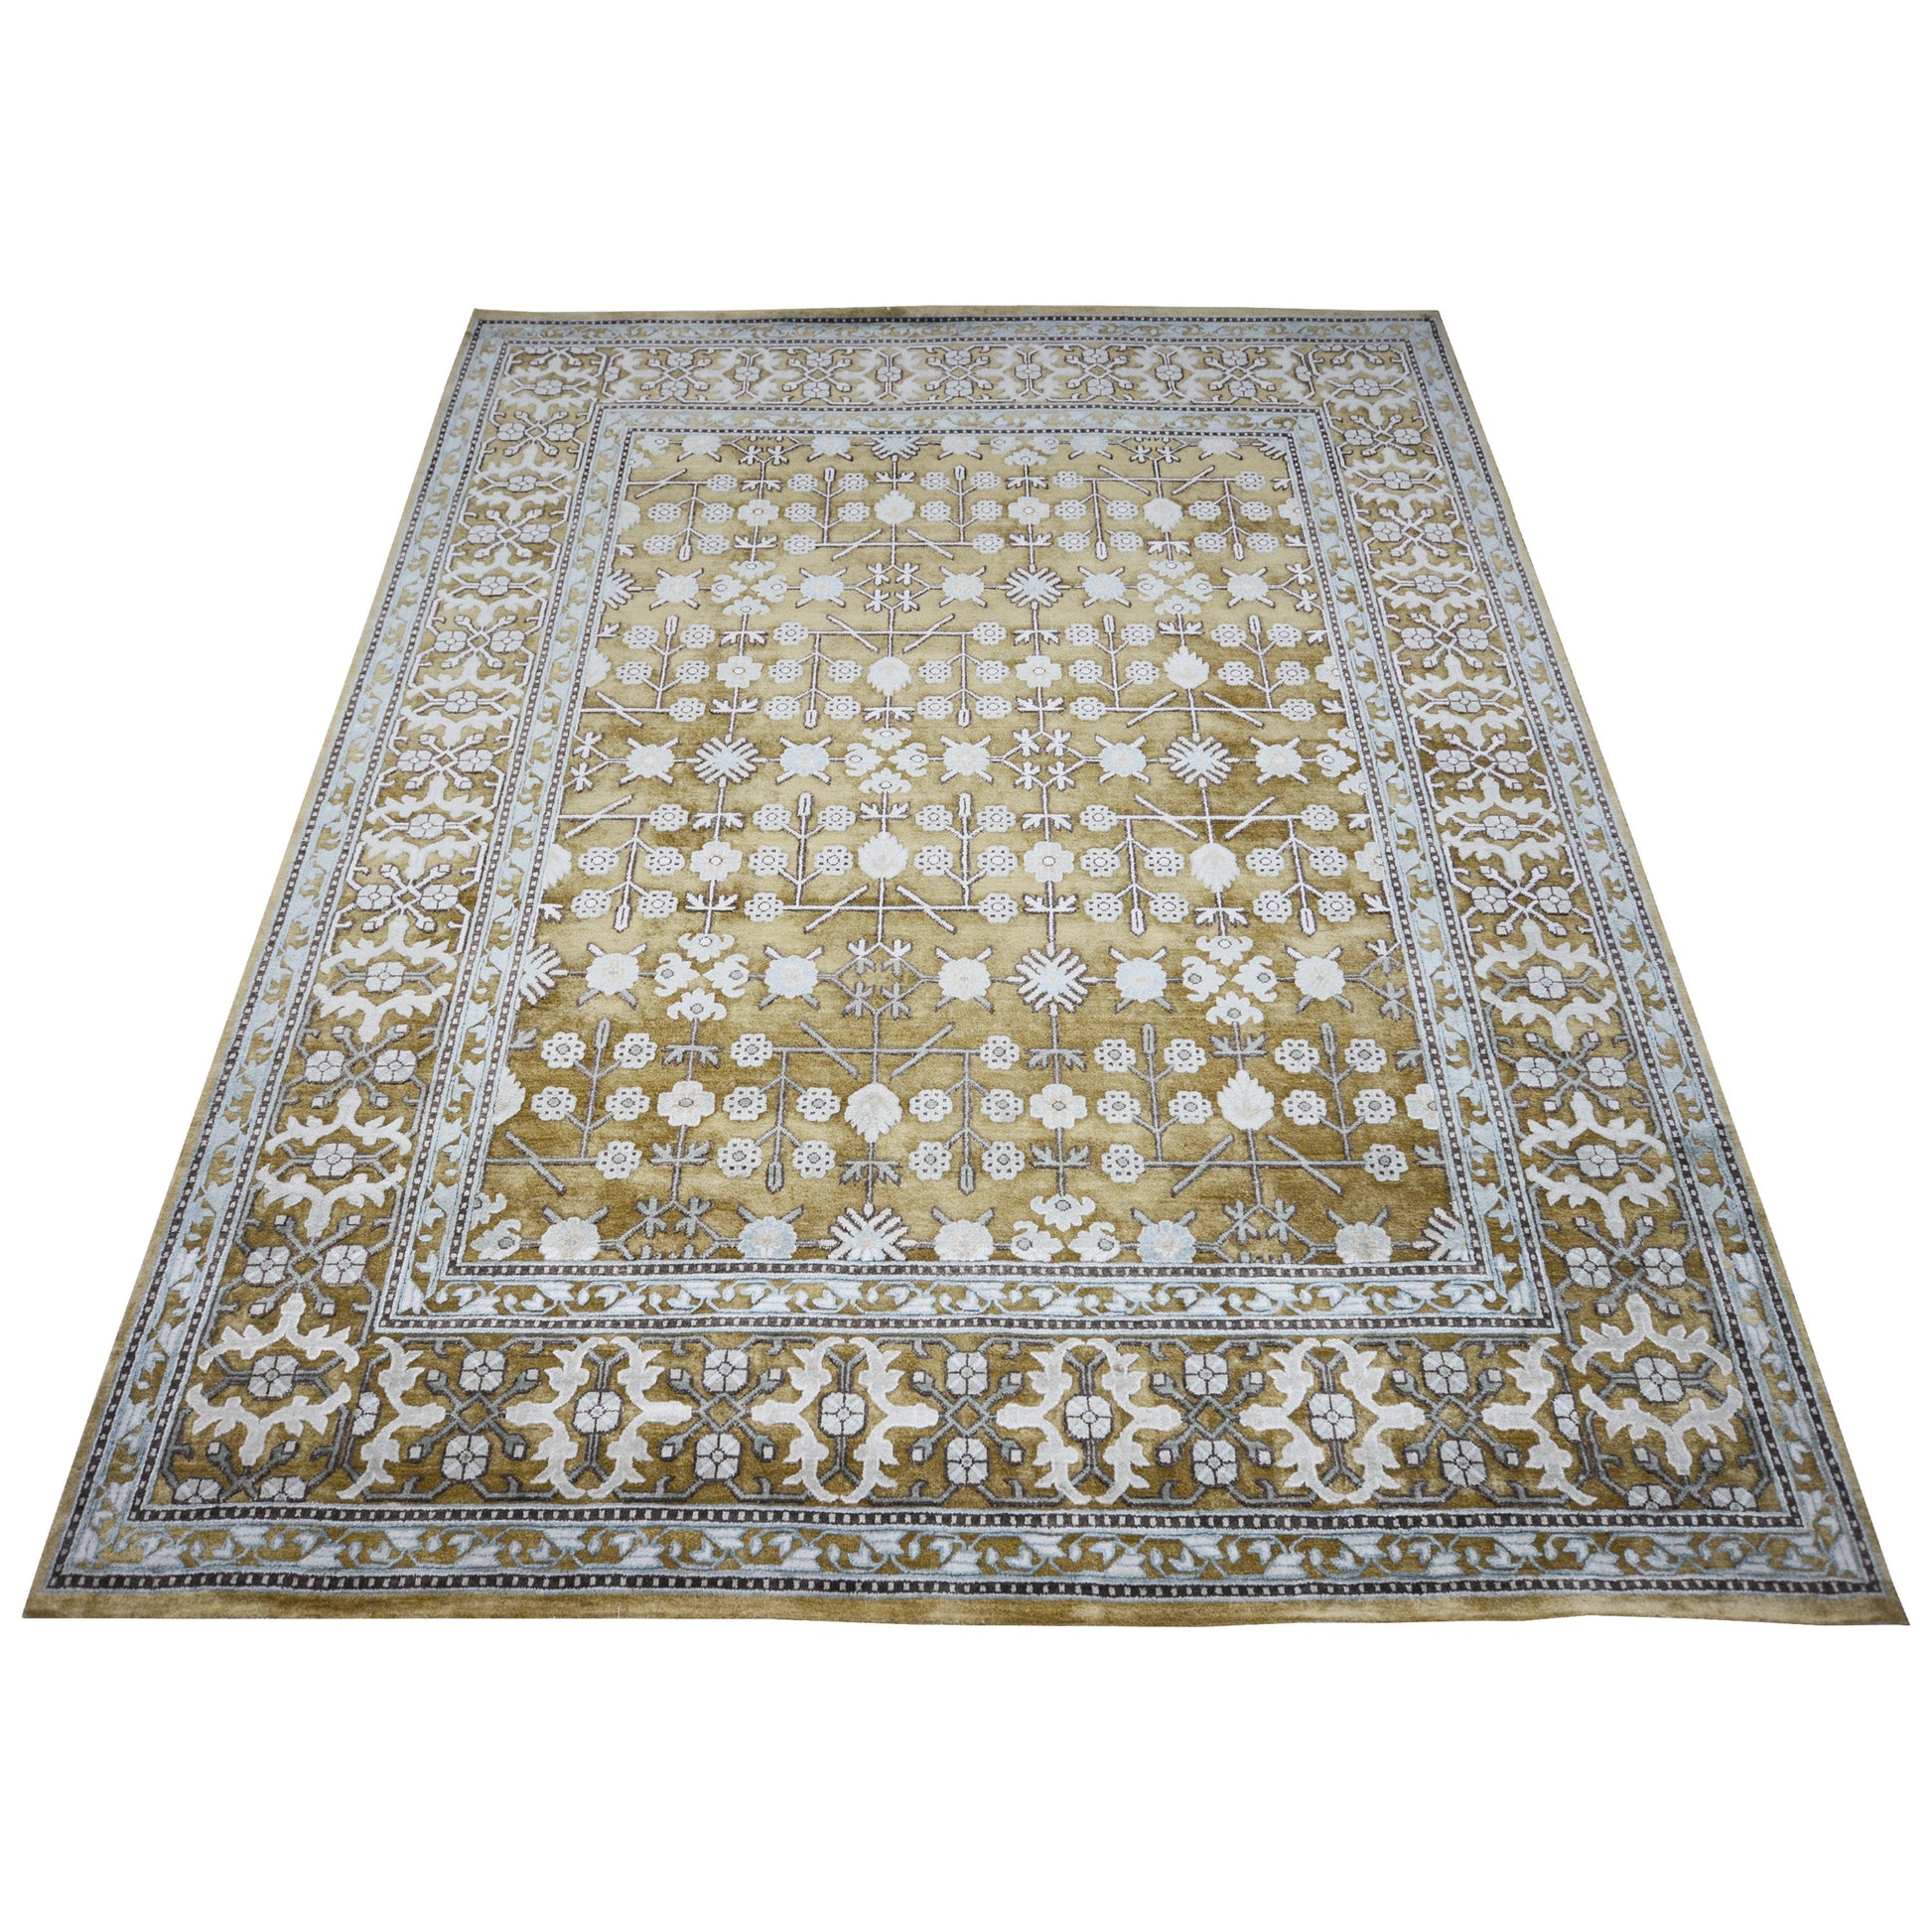 Get trendy with Garden Camel Ivory and Blue Traditional Samarkand Handknotted Area Rug - Traditional Rugs available at Jaipur Oriental Rugs. Grab yours for $4570.00 today!